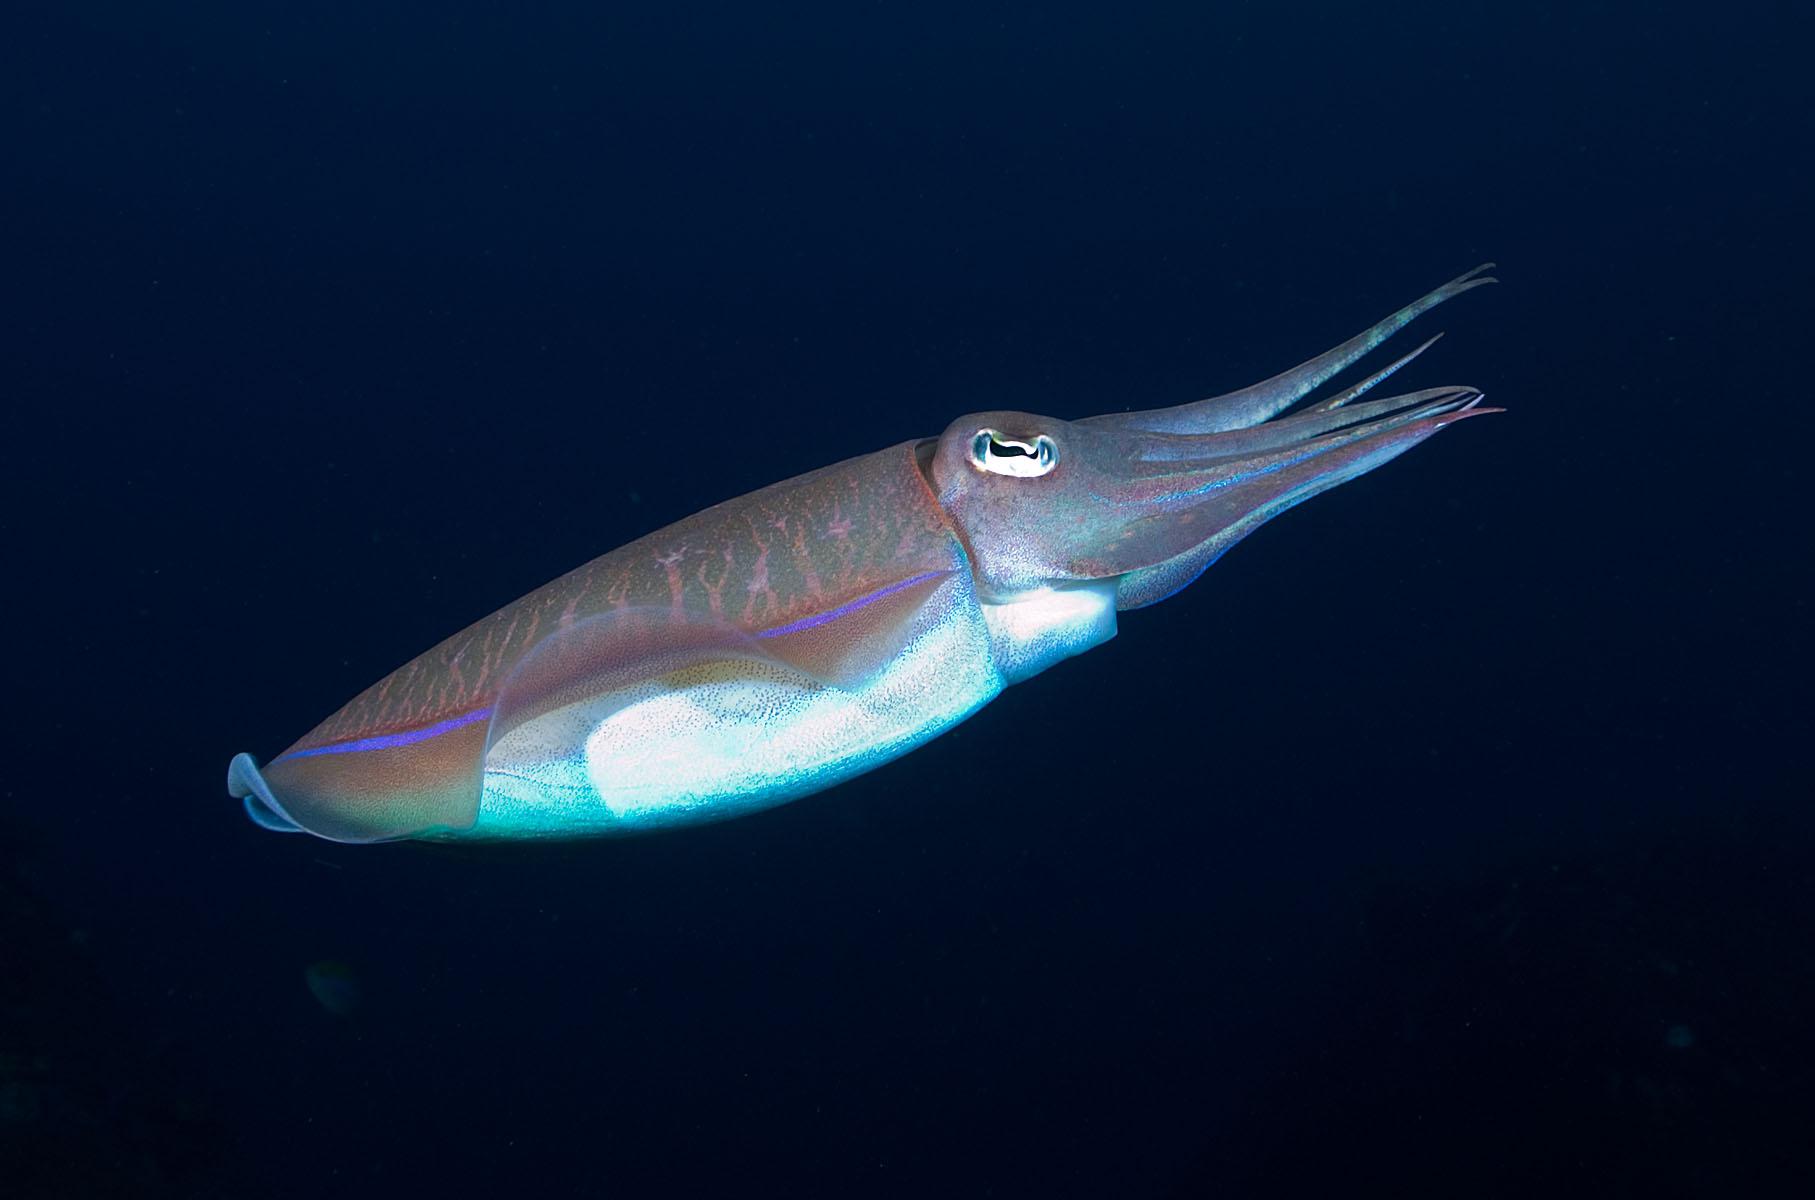 Cuttlefish Flight High Quality And Resolution Wallpaper